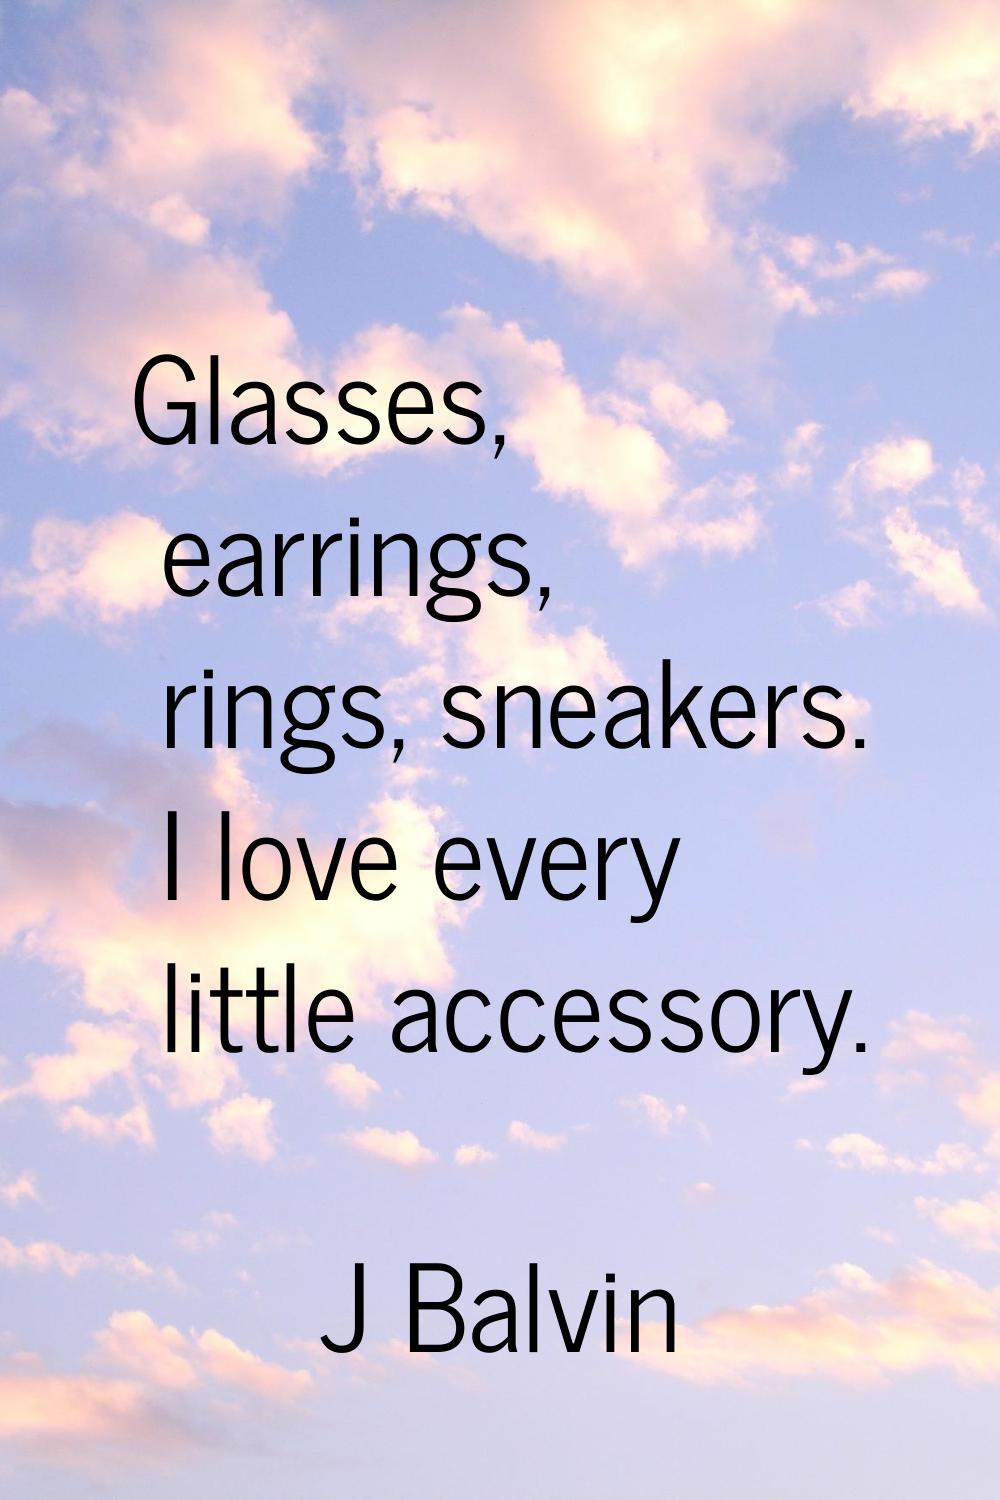 Glasses, earrings, rings, sneakers. I love every little accessory.